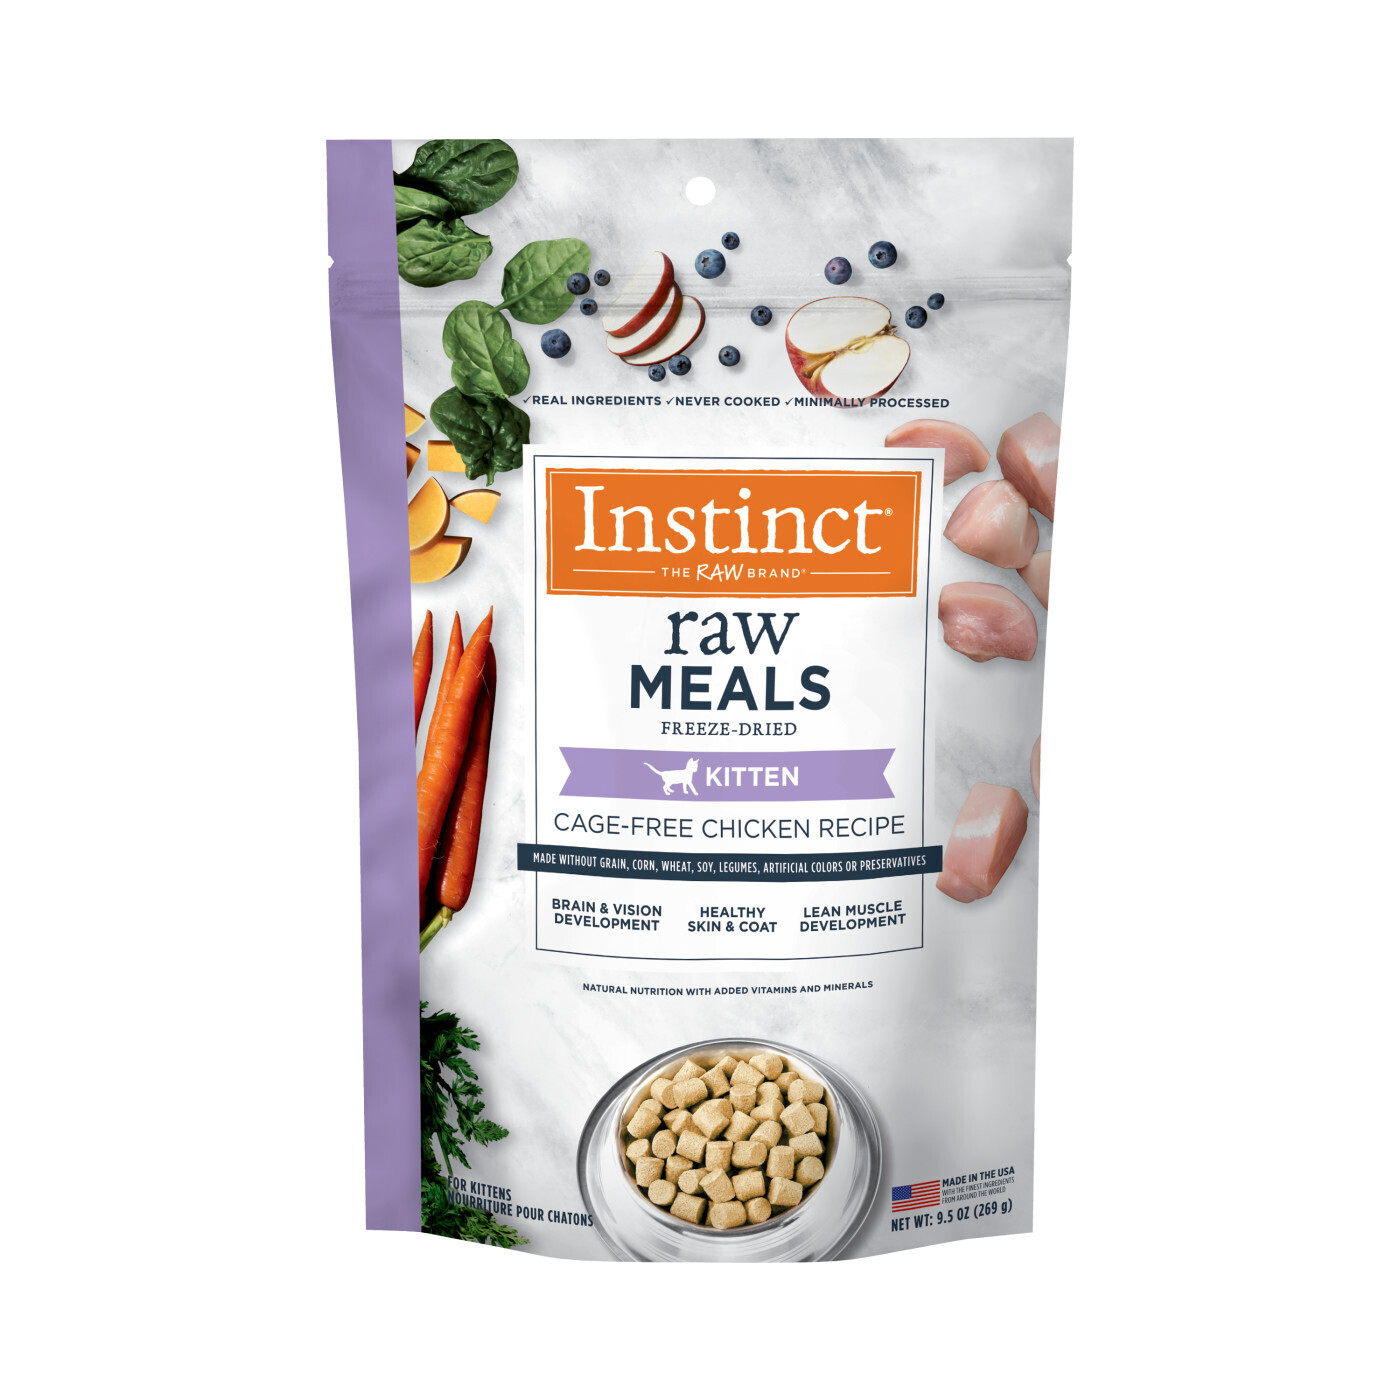 INSTINCT RAW FREEZE-DRIED MEALS CAGE-FREE CHICKEN RECIPE FOR KITTENS - 幼猫鸡肉冻干粮